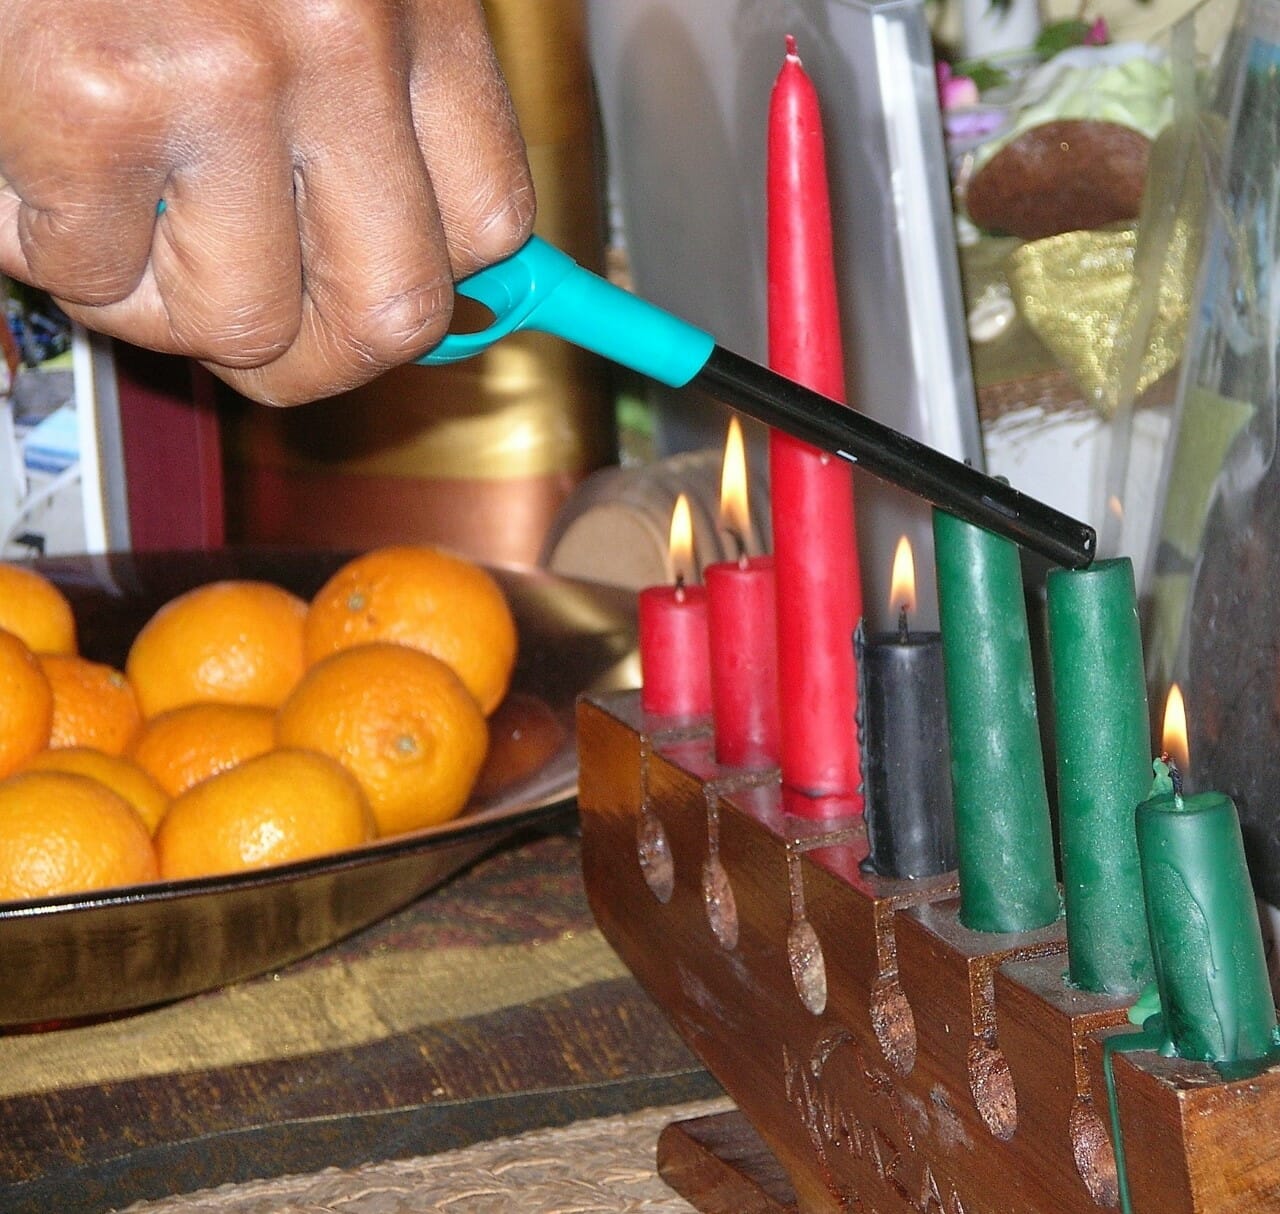 Lighting Kwanzaa candles with a stick lighter, and a dish with oranges in the background.